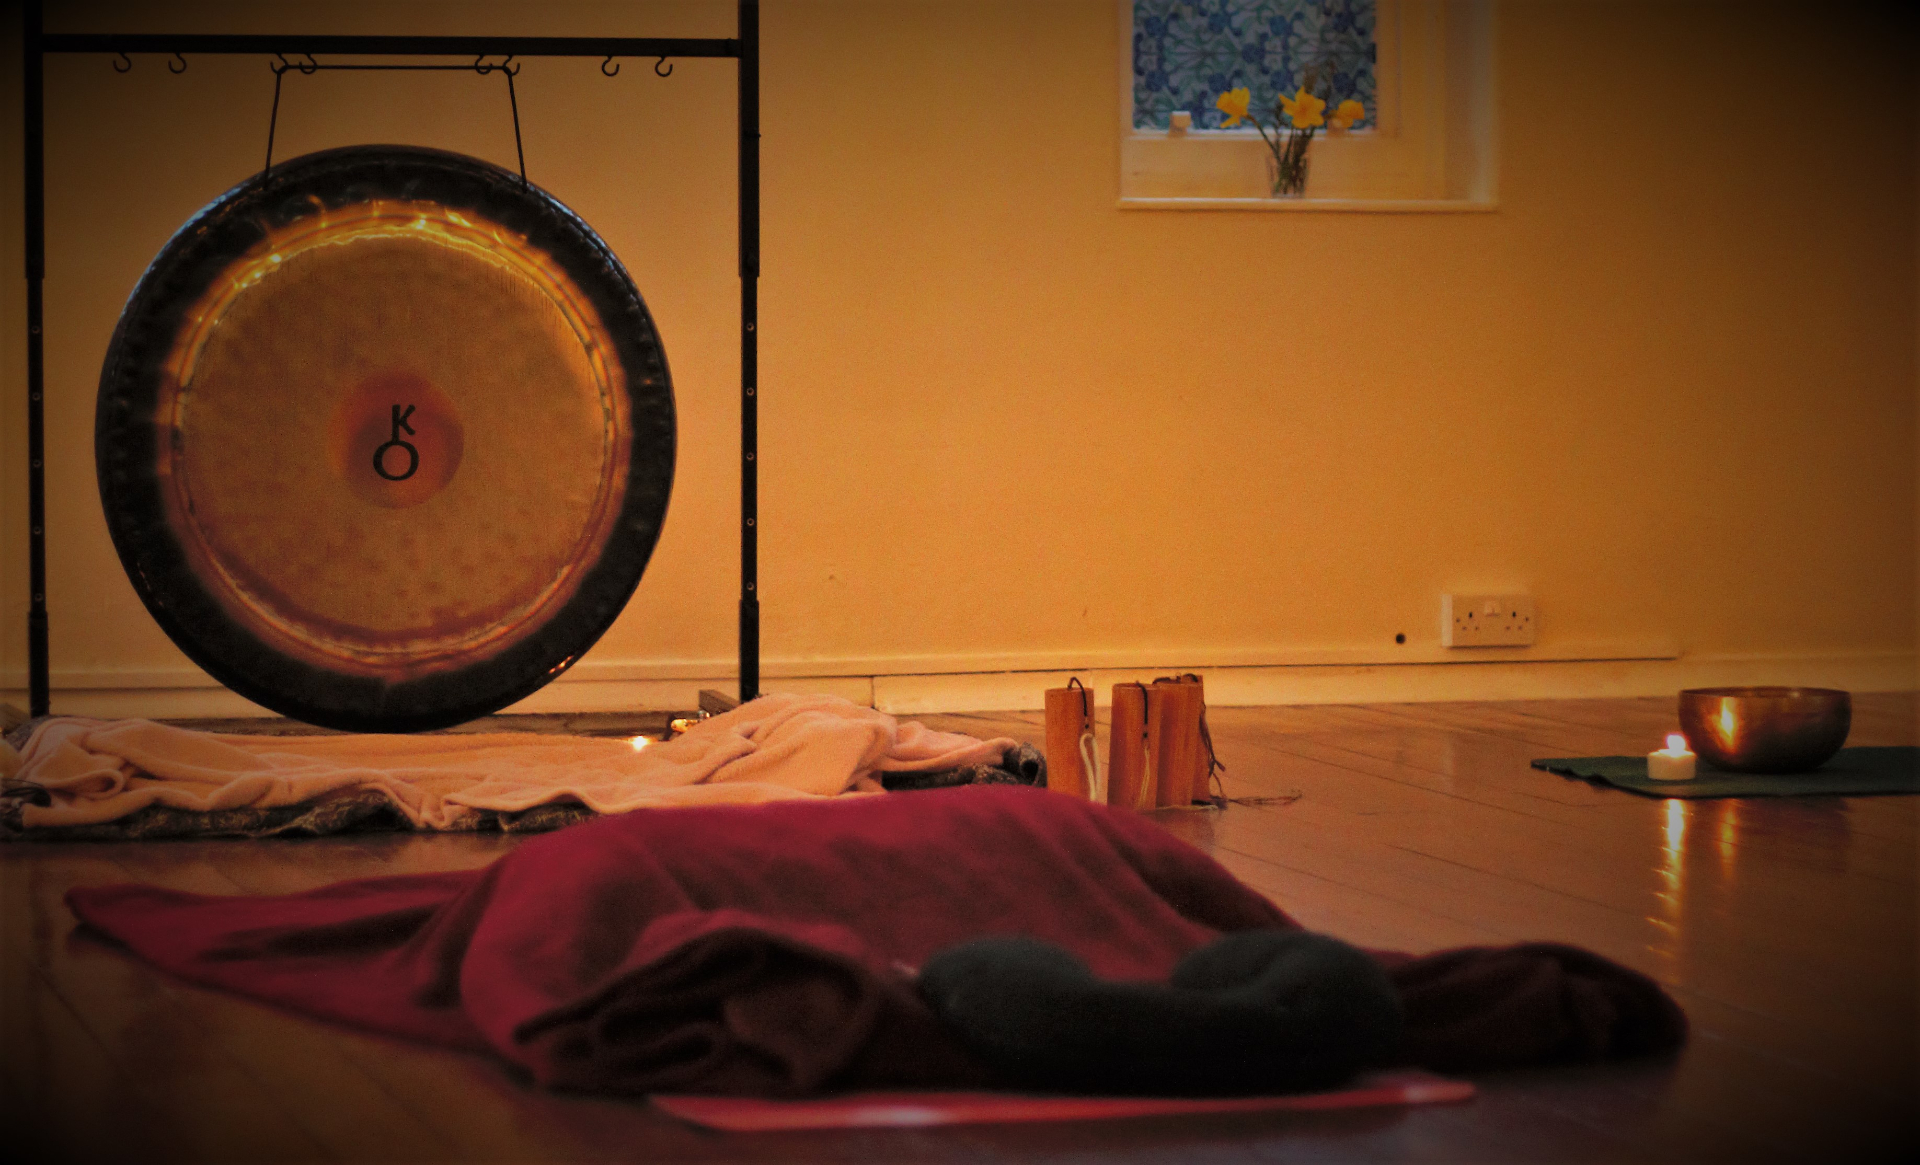 Therapy space with gong, blankets, candles and bowl